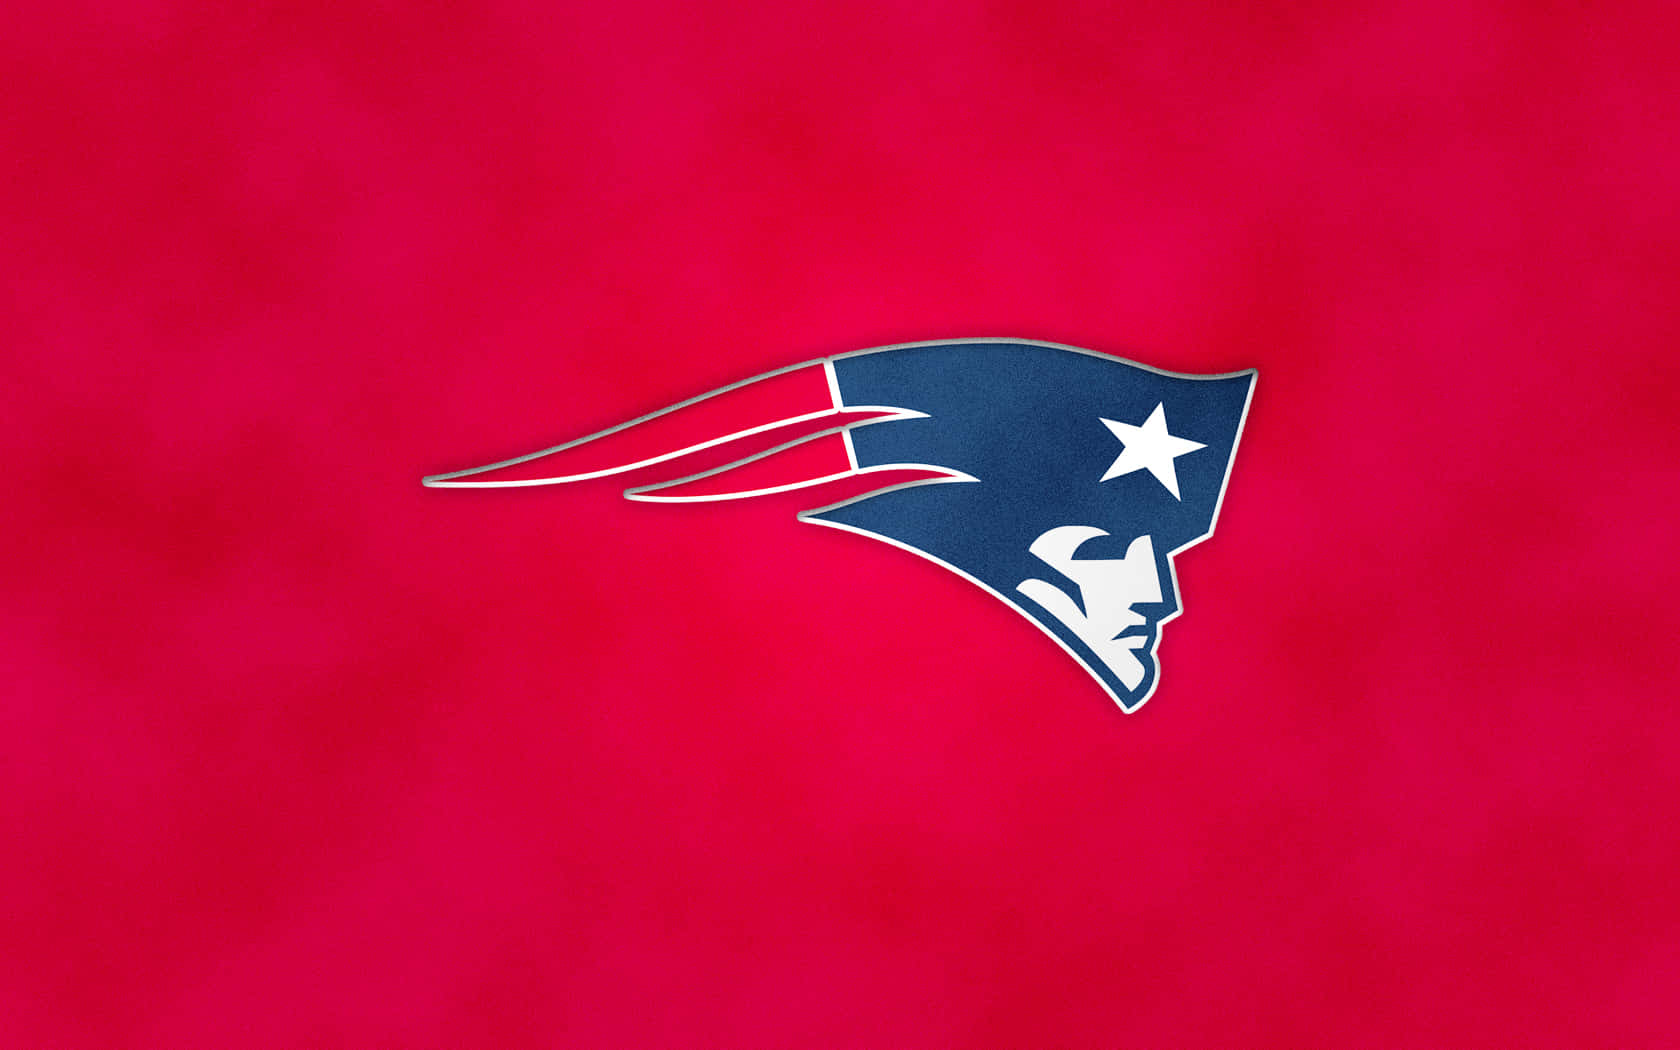 a new england patriots logo on a red background Wallpaper